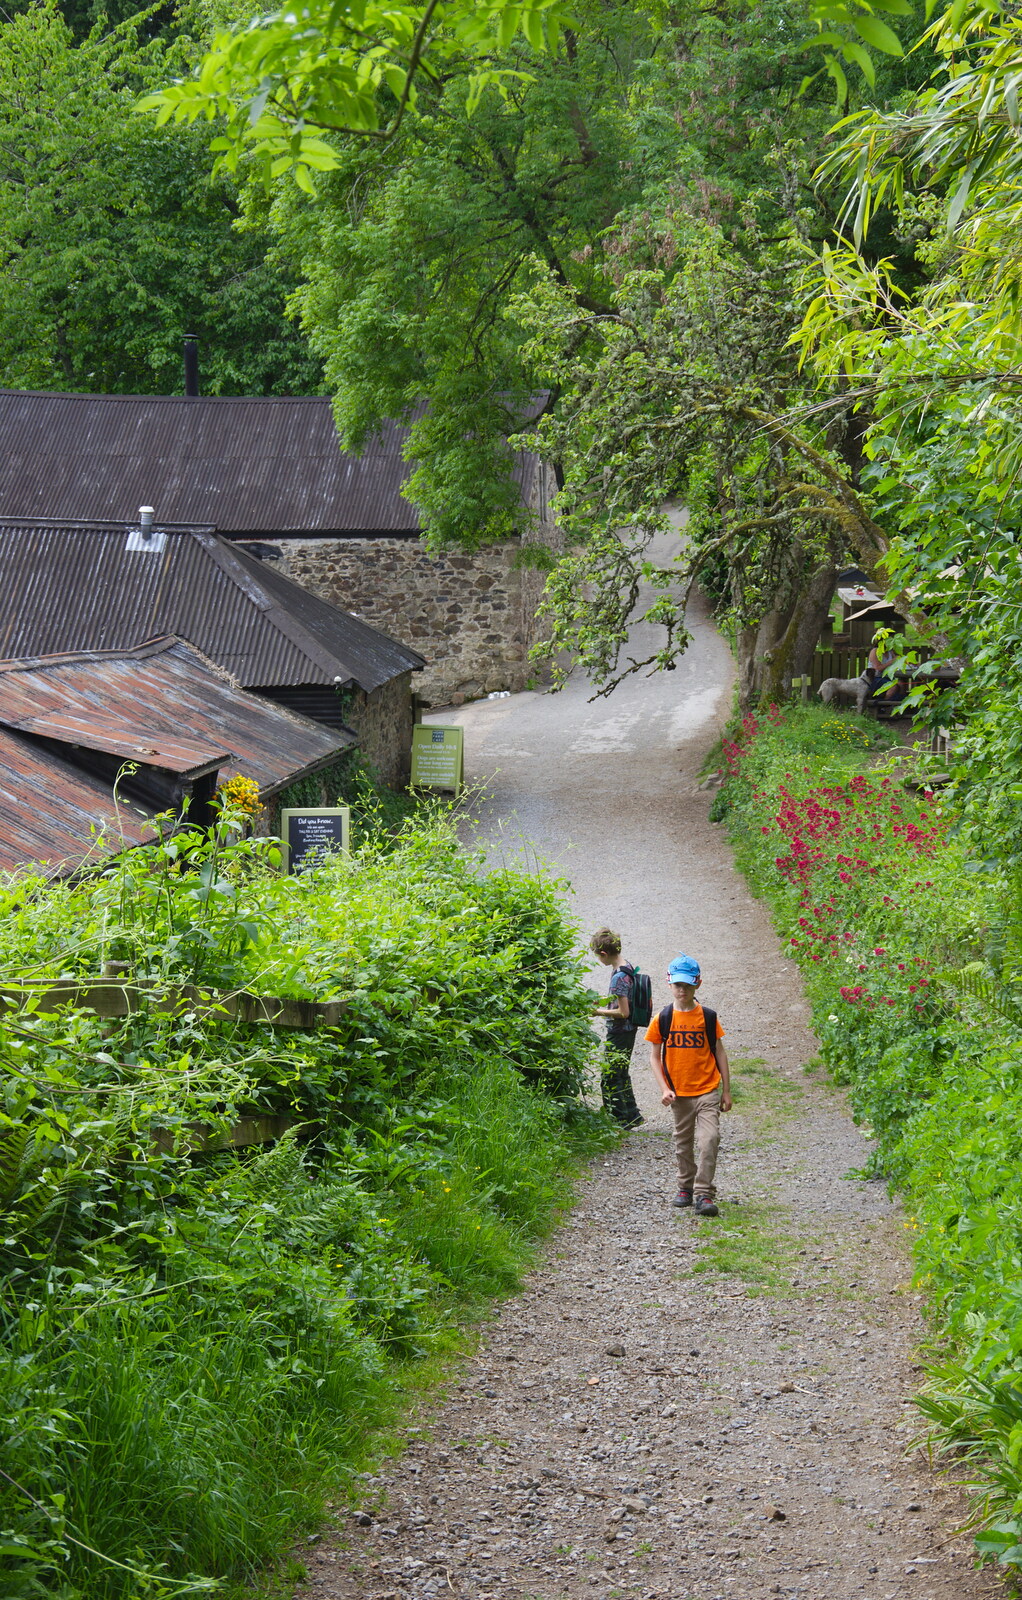 Chagford Lido and a Trip to Parke, Bovey Tracey, Devon - 25th May 2019: The boys on a path